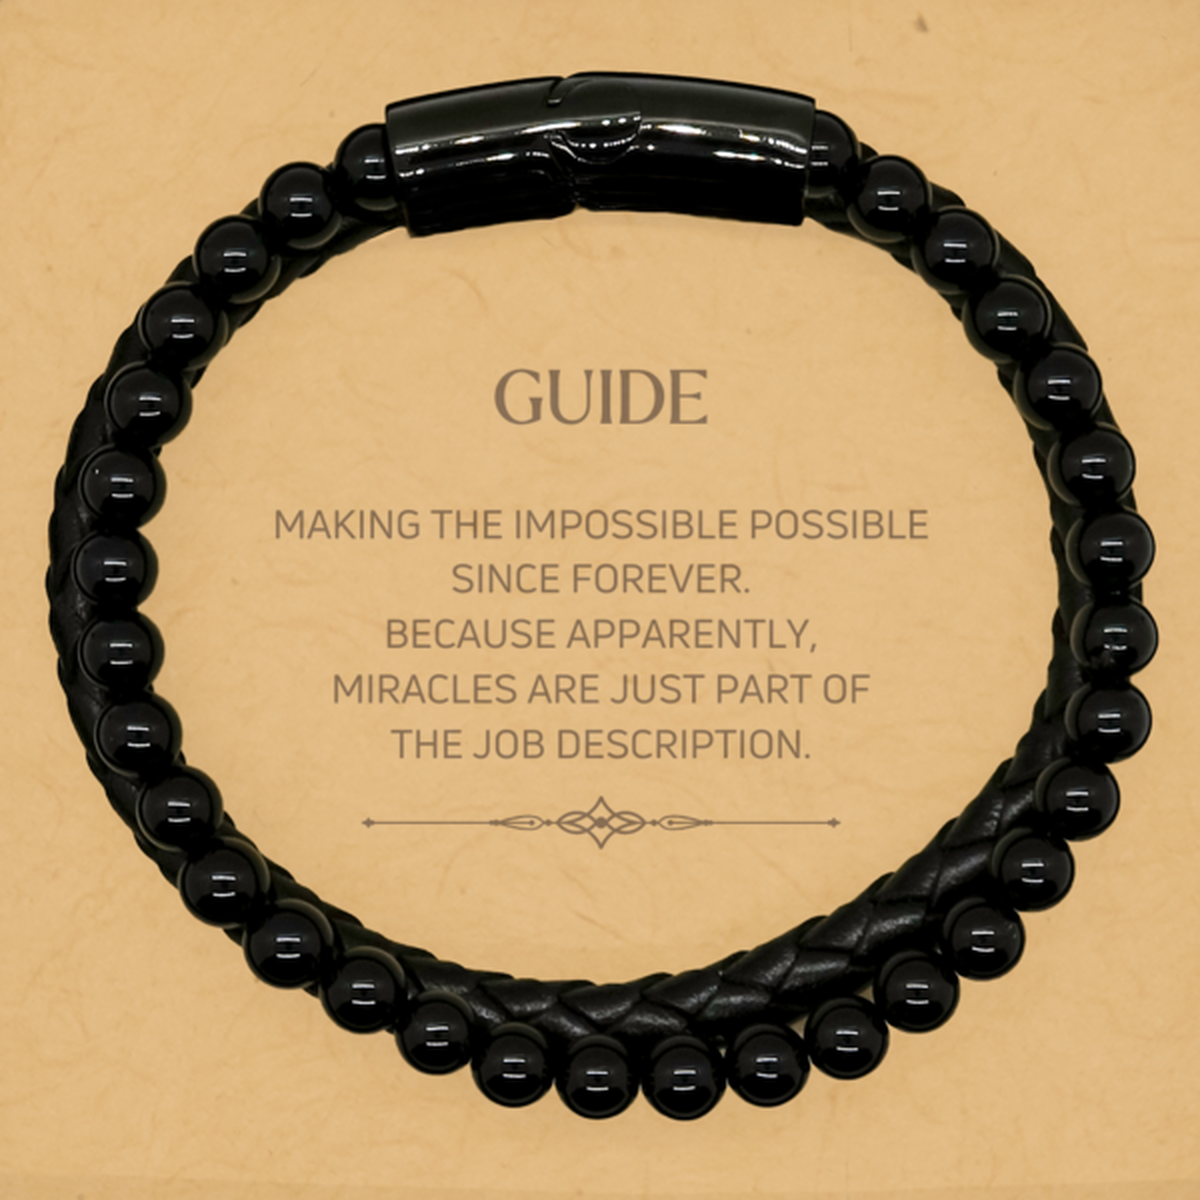 Funny Guide Gifts, Miracles are just part of the job description, Inspirational Birthday Stone Leather Bracelets For Guide, Men, Women, Coworkers, Friends, Boss